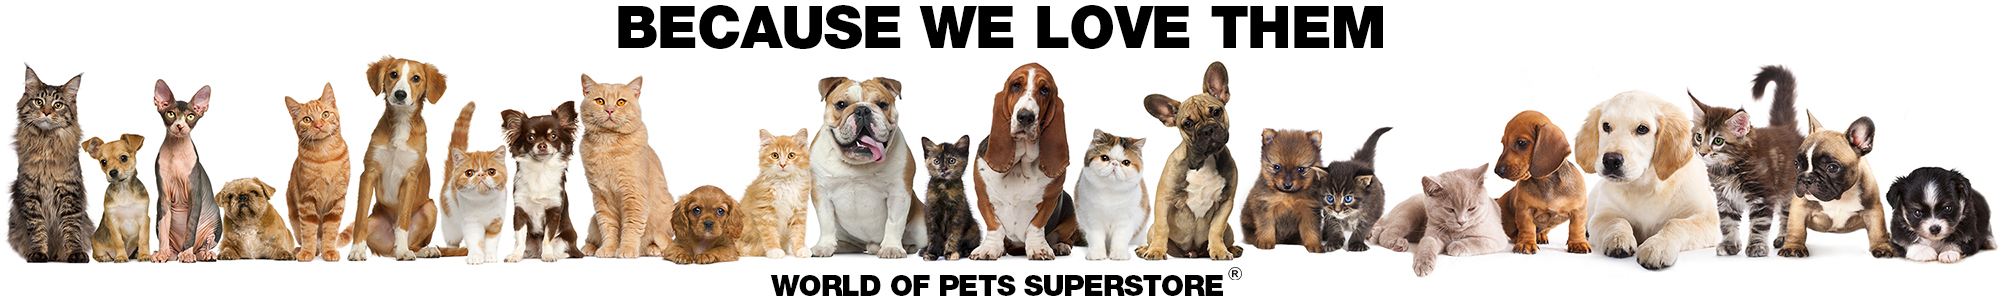 A whole bunch of cats and dogs because we love them